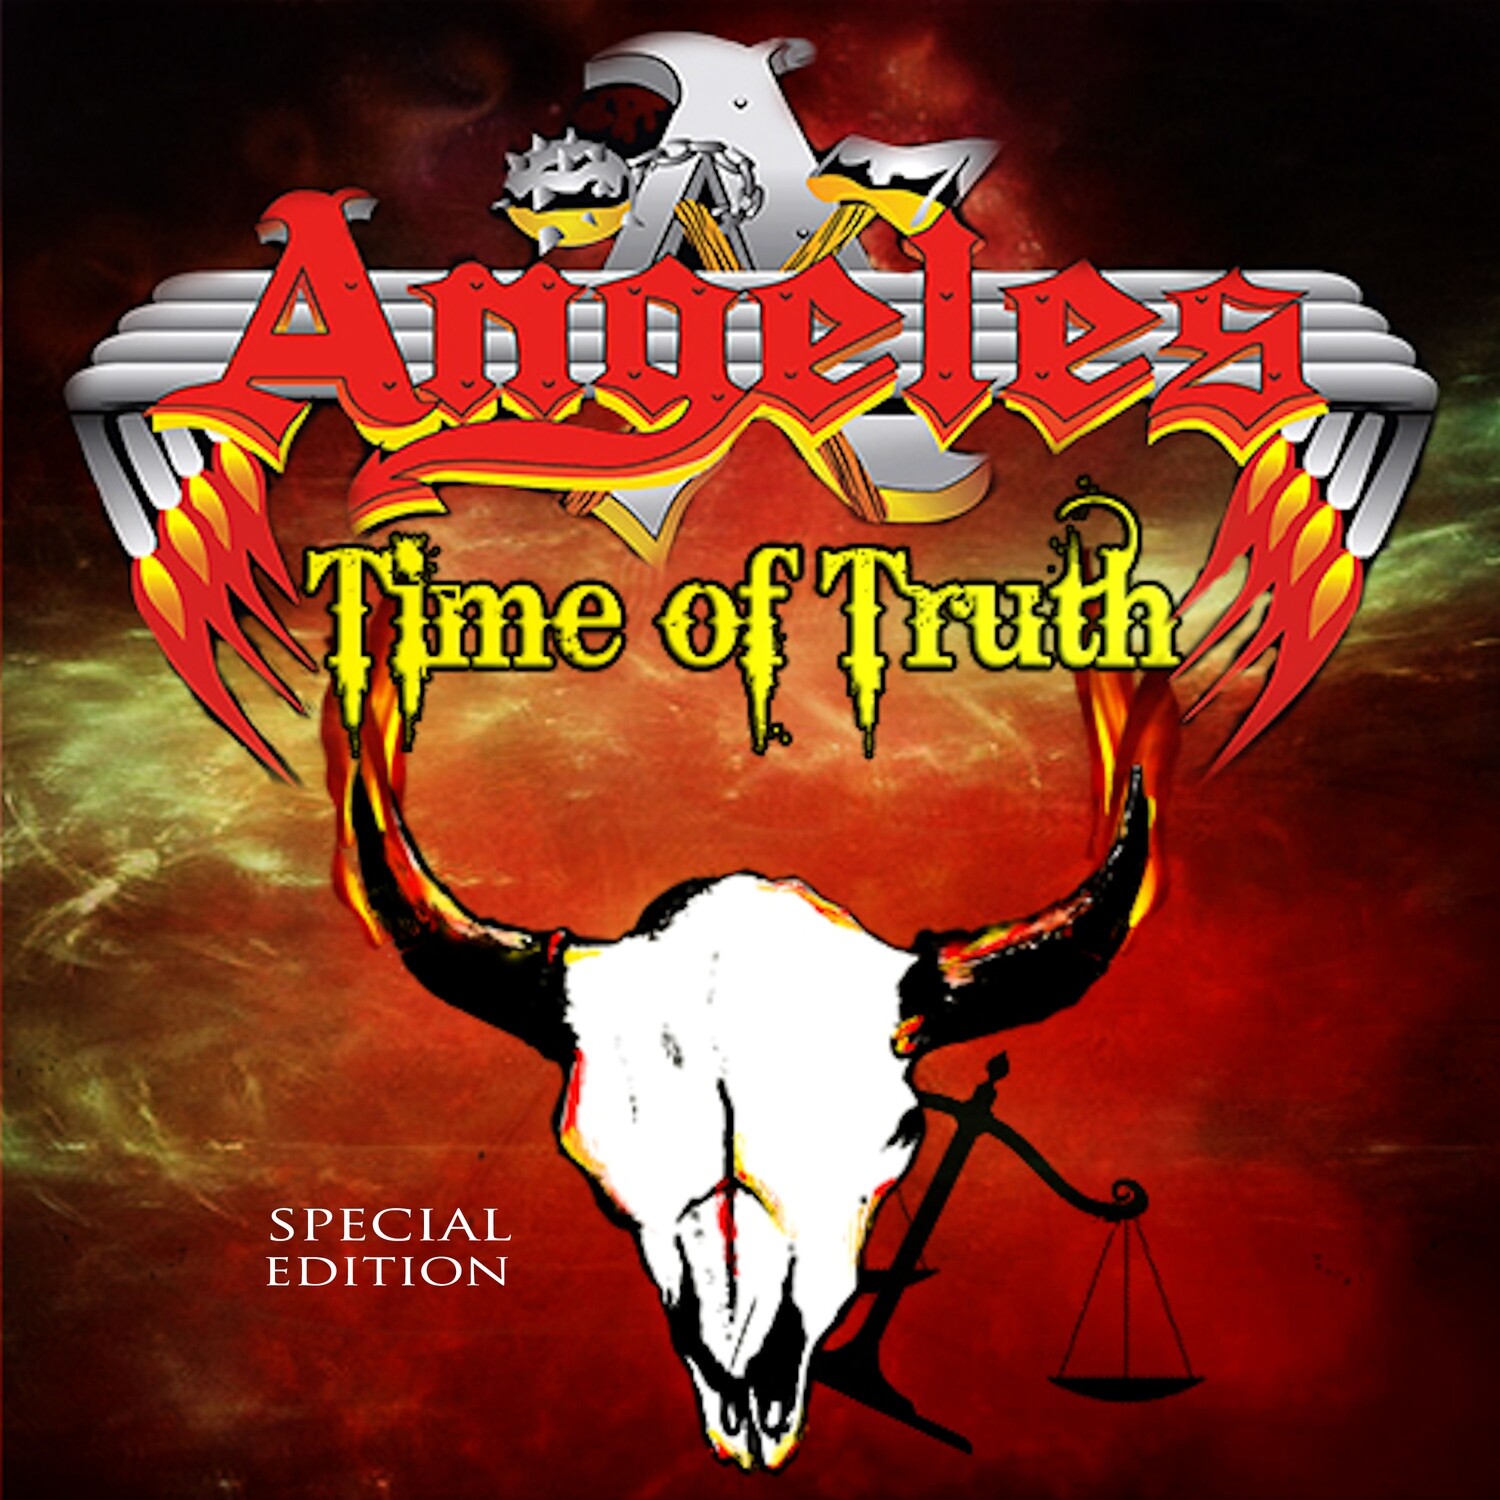 Time of Truth by Angeles "Special Edition" [CD]